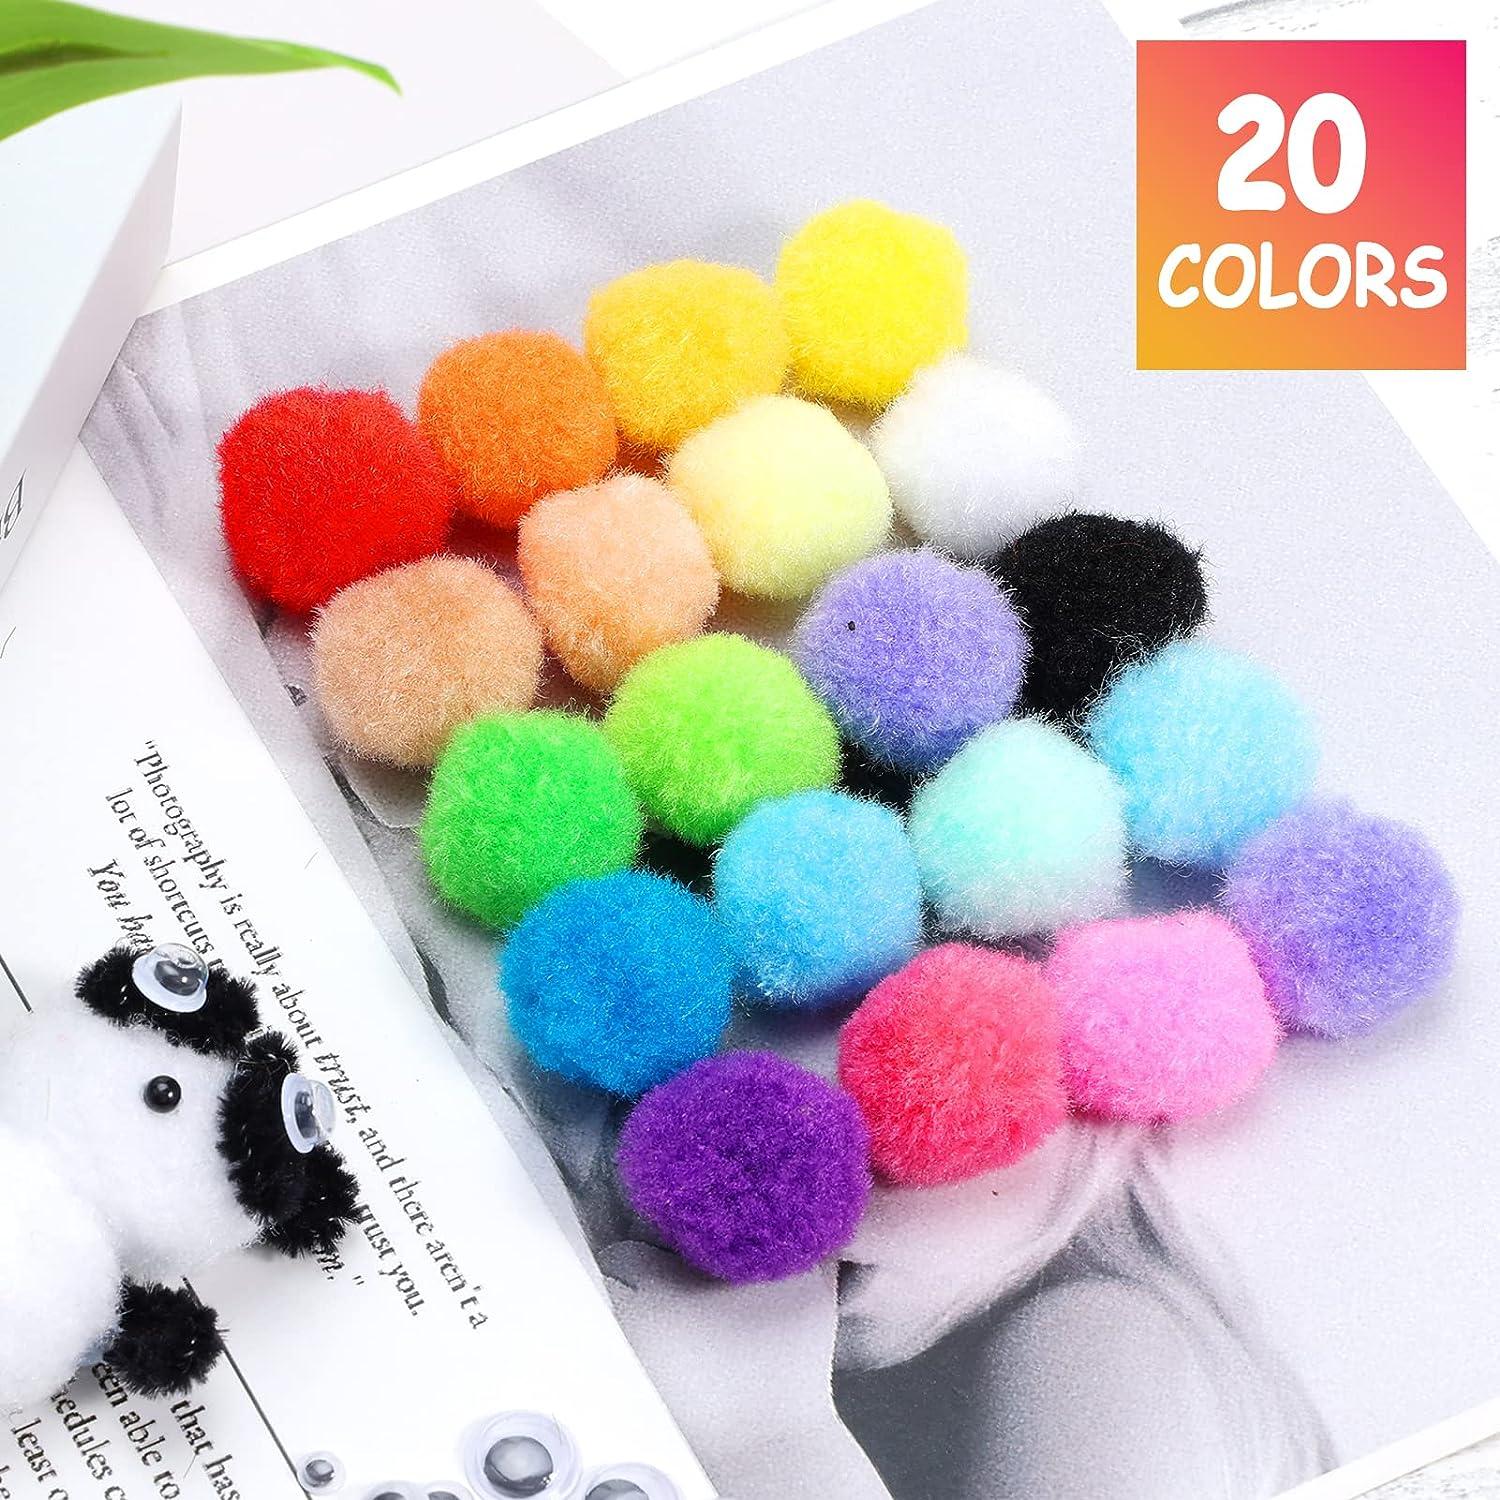 Aoibrloy 450 Pcs 300PCS 1Inch Pom Poms with 150PCS Wiggle Eyes Multicolor Craft  Pom Pom Balls for Kids DIY Arts and Crafts Projects and Decorations  300PCS-1inch